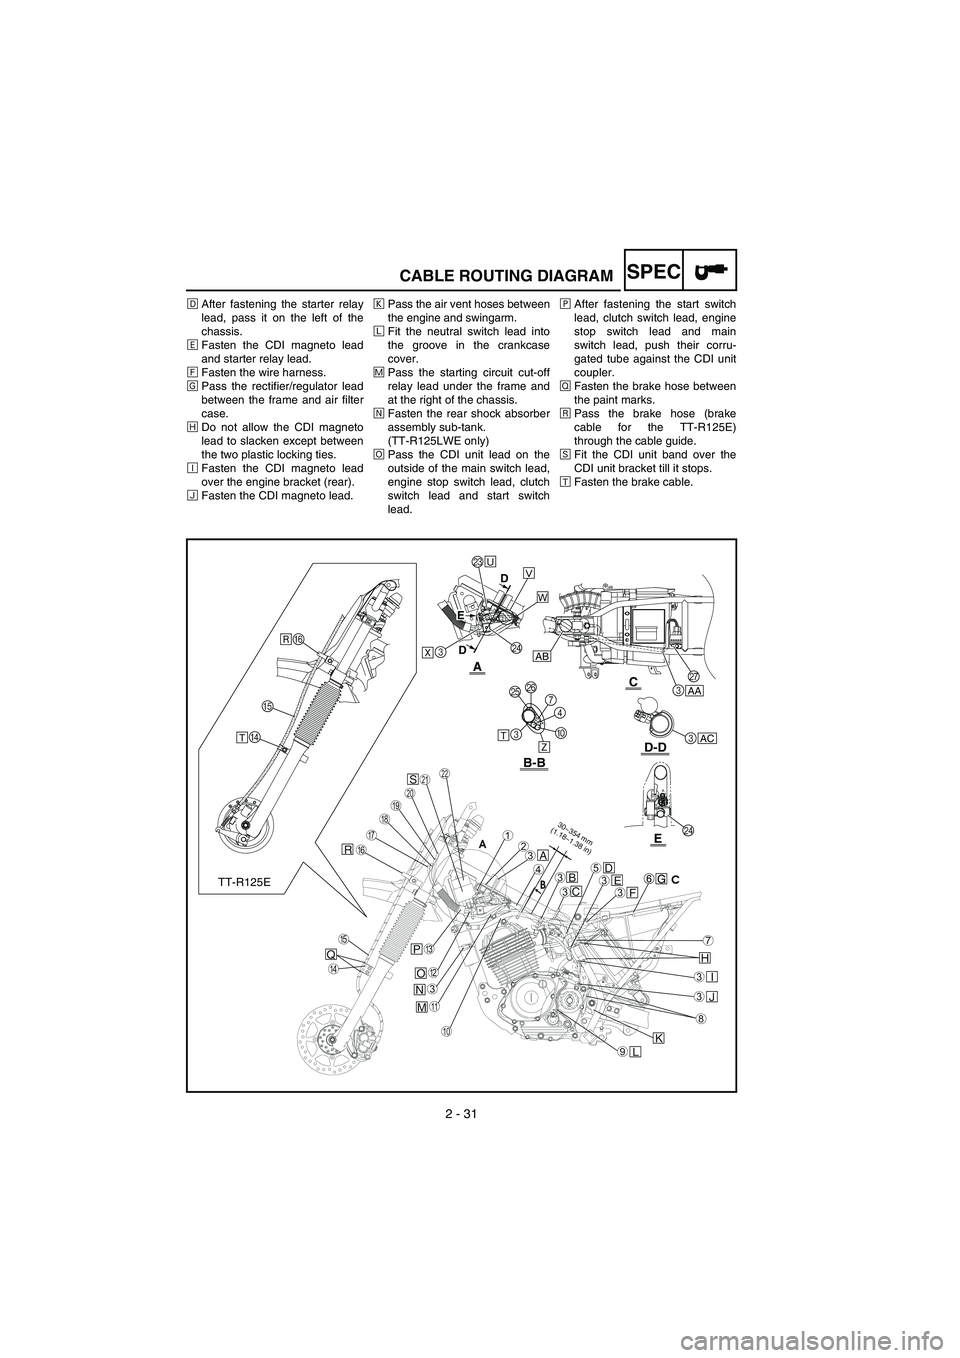 YAMAHA TTR125 2007  Notices Demploi (in French) 8 - B - V
2 - 31
SPECCABLE ROUTING DIAGRAM
ÎAfter fastening the starter relay
lead, pass it on the left of the
chassis.
‰ Fasten the CDI magneto lead
and starter relay lead.
Ï Fasten the wire harn